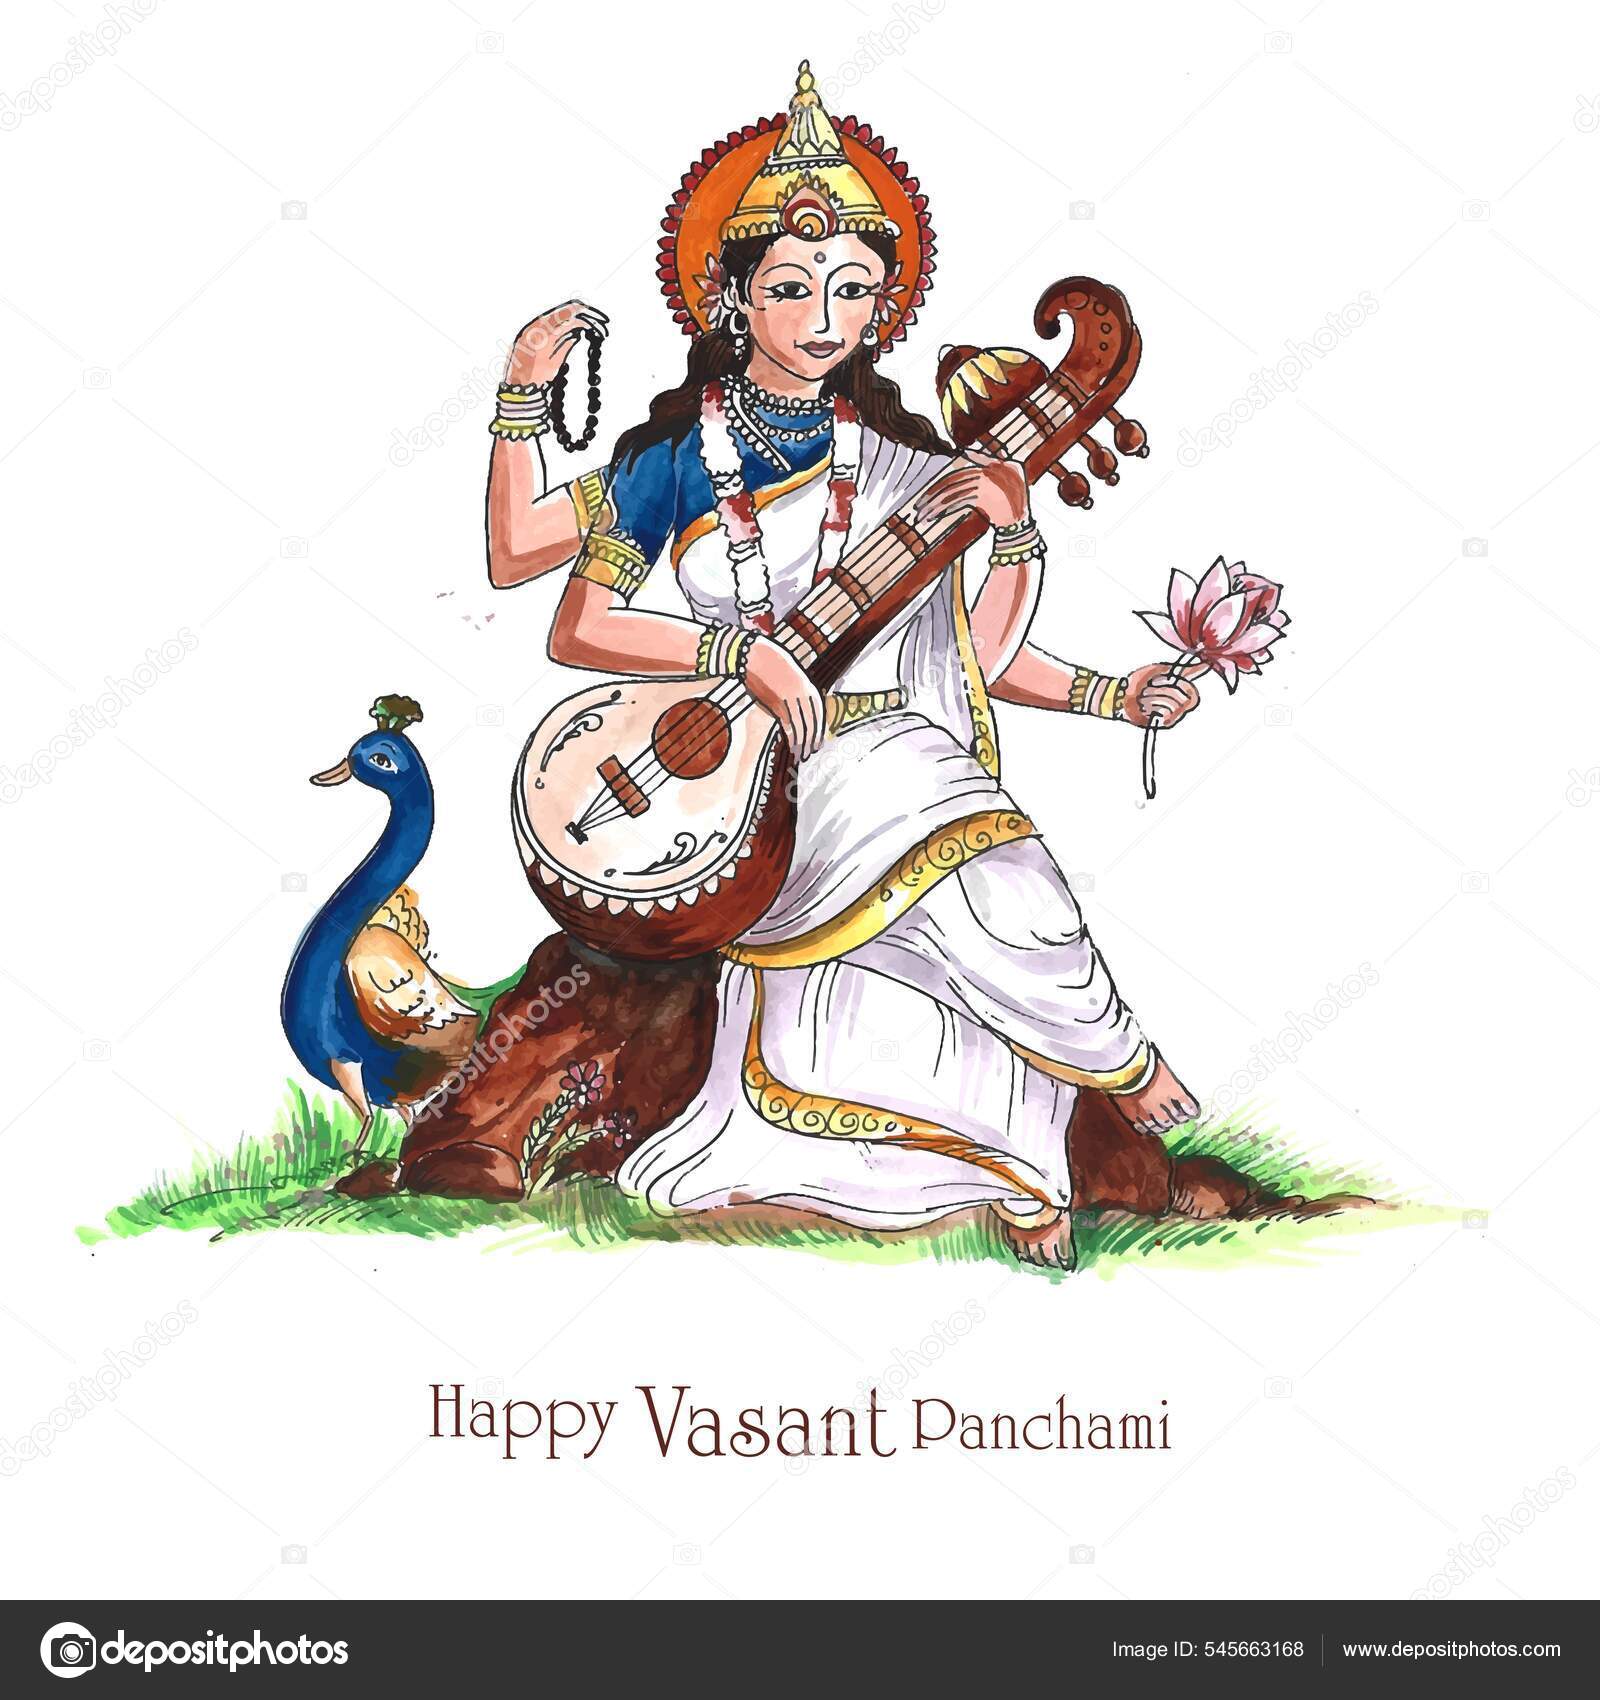 Happy Vasant Panchami 2022: Wishes, Images, Status, Quotes, Messages and  WhatsApp Greetings to Share on Saraswati Puja - News18